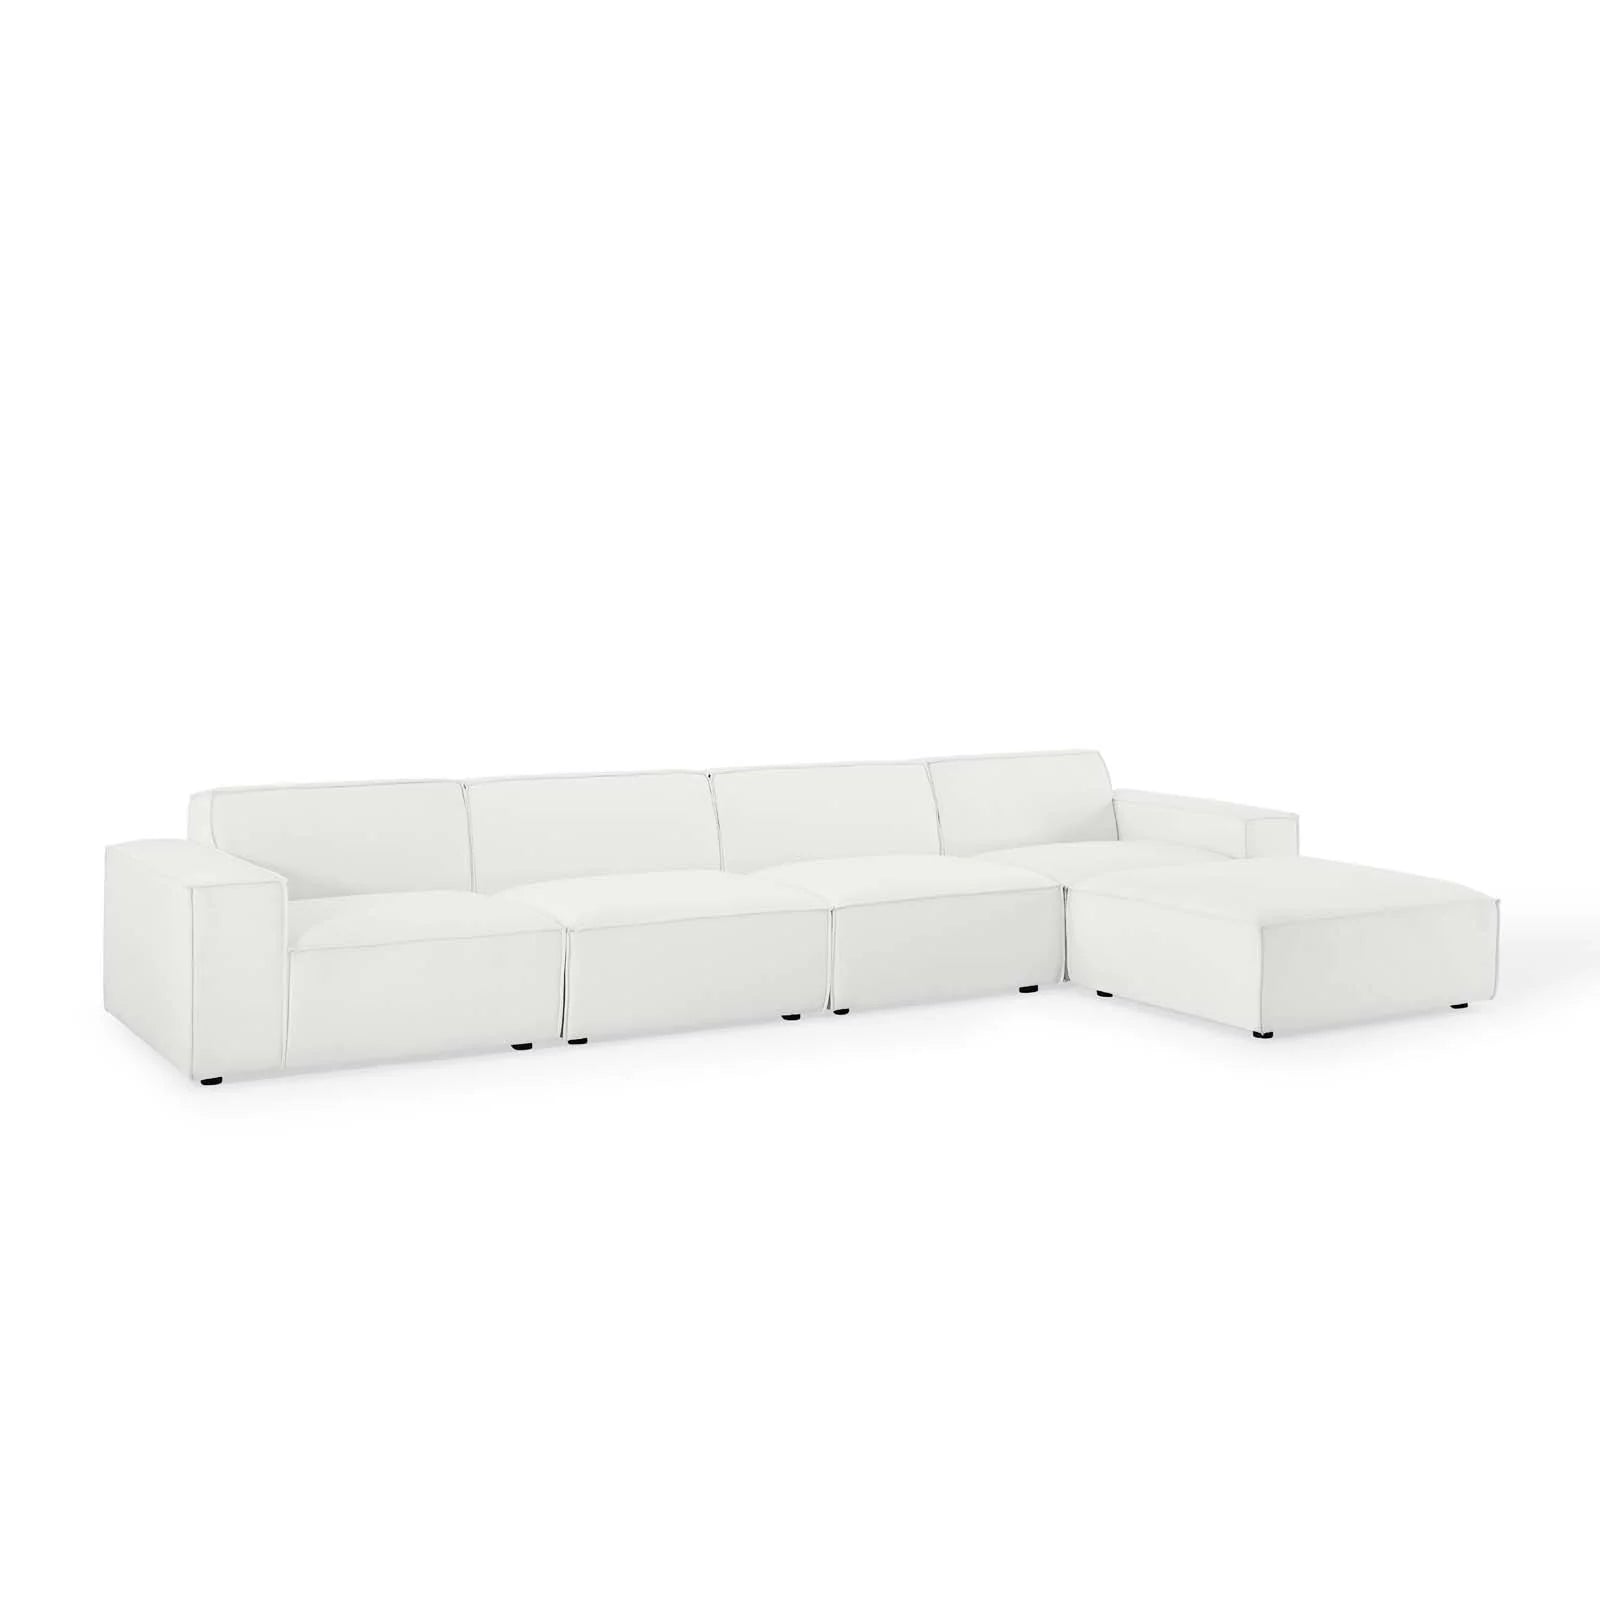 BREEZE 5 PIECE EXTENDED SECTIONAL - WHITE